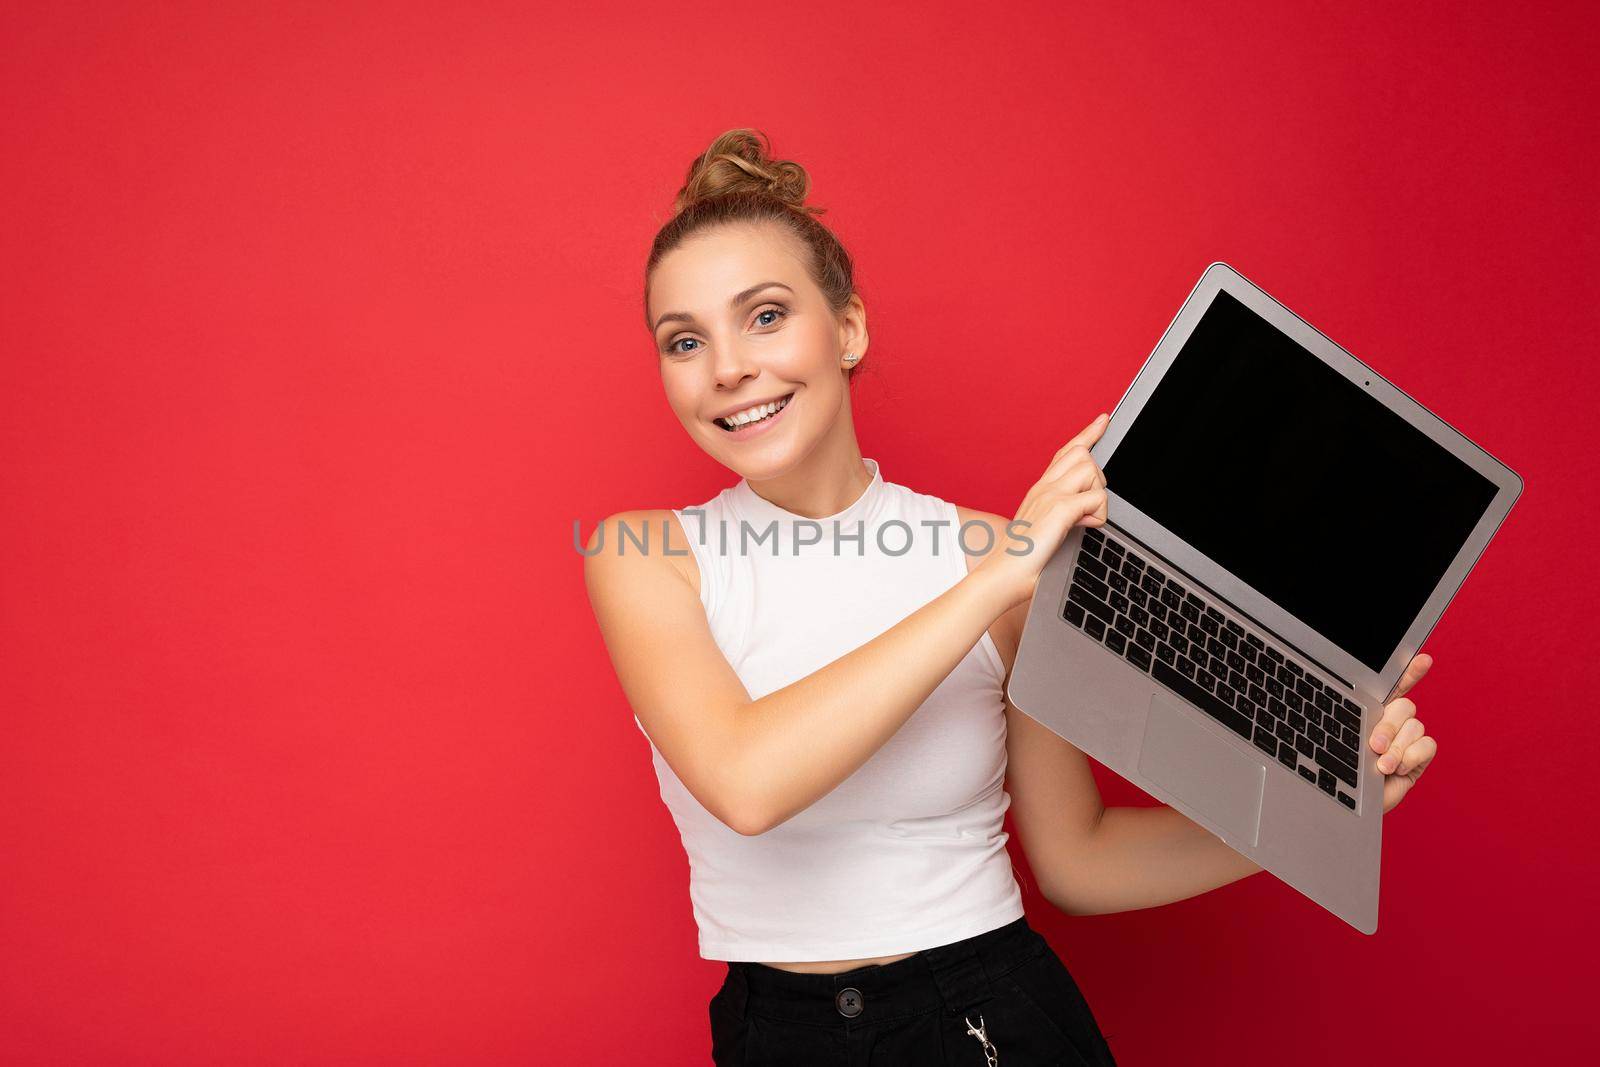 beautiful smiling fascinating happy blond young woman with gathered hair looking at camera holding computer laptop wearing white t-shirt isolated over red wall background.